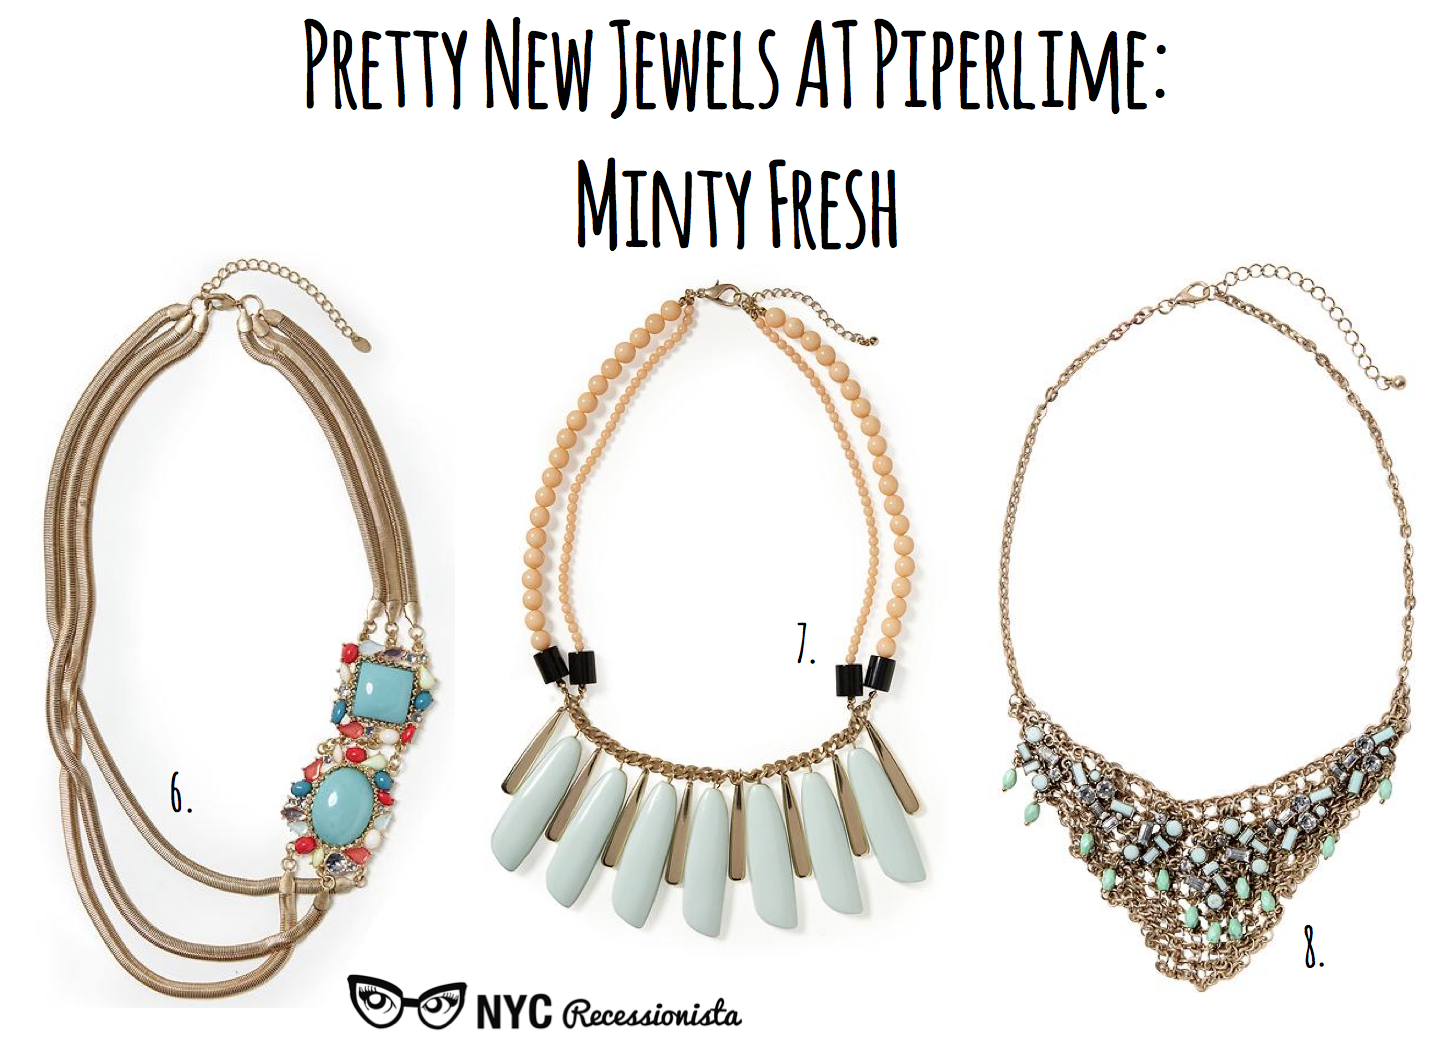 Pretty new jewels at Piperlime - NYC Recessionista